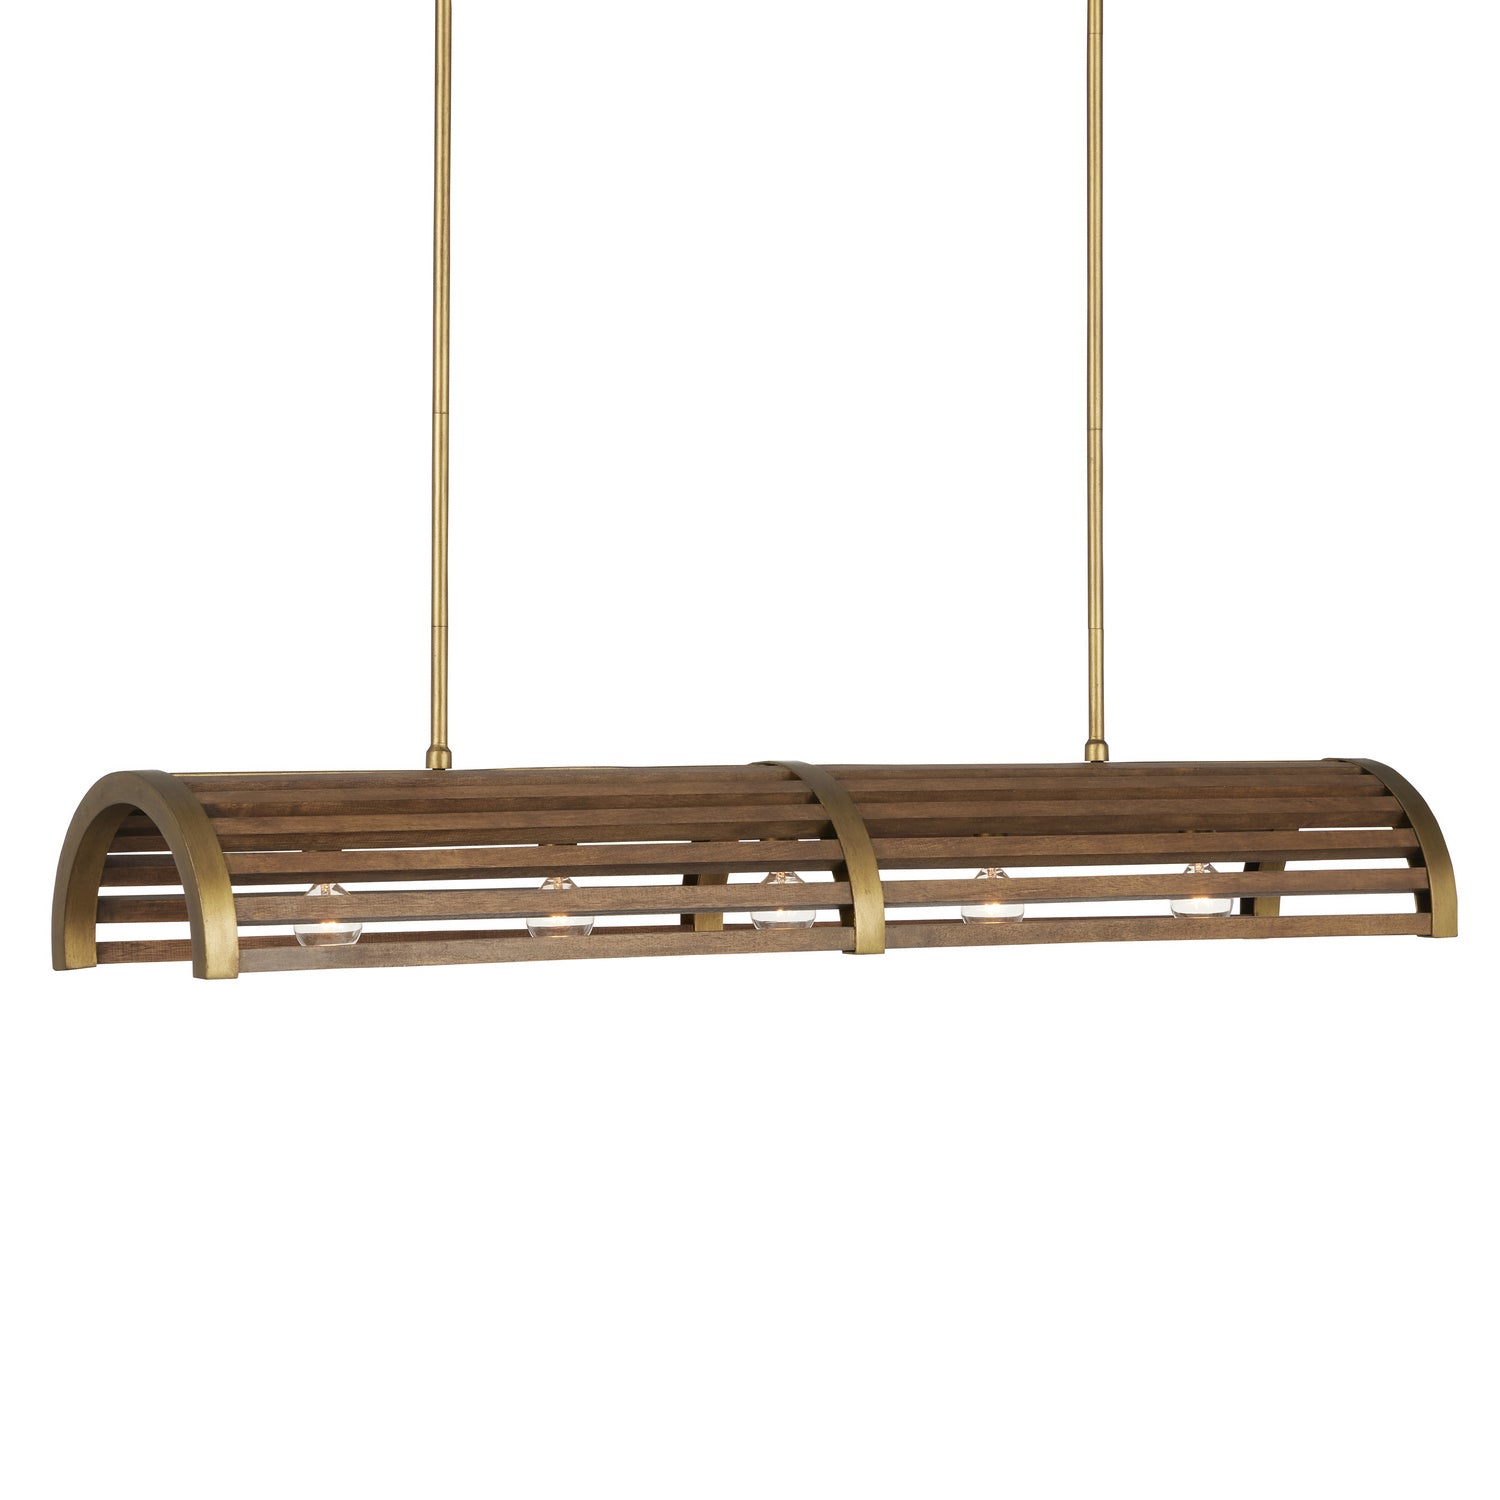 Currey and Company - 9000-0967 - Five Light Chandelier - Woodbine - Chestnut/Brass